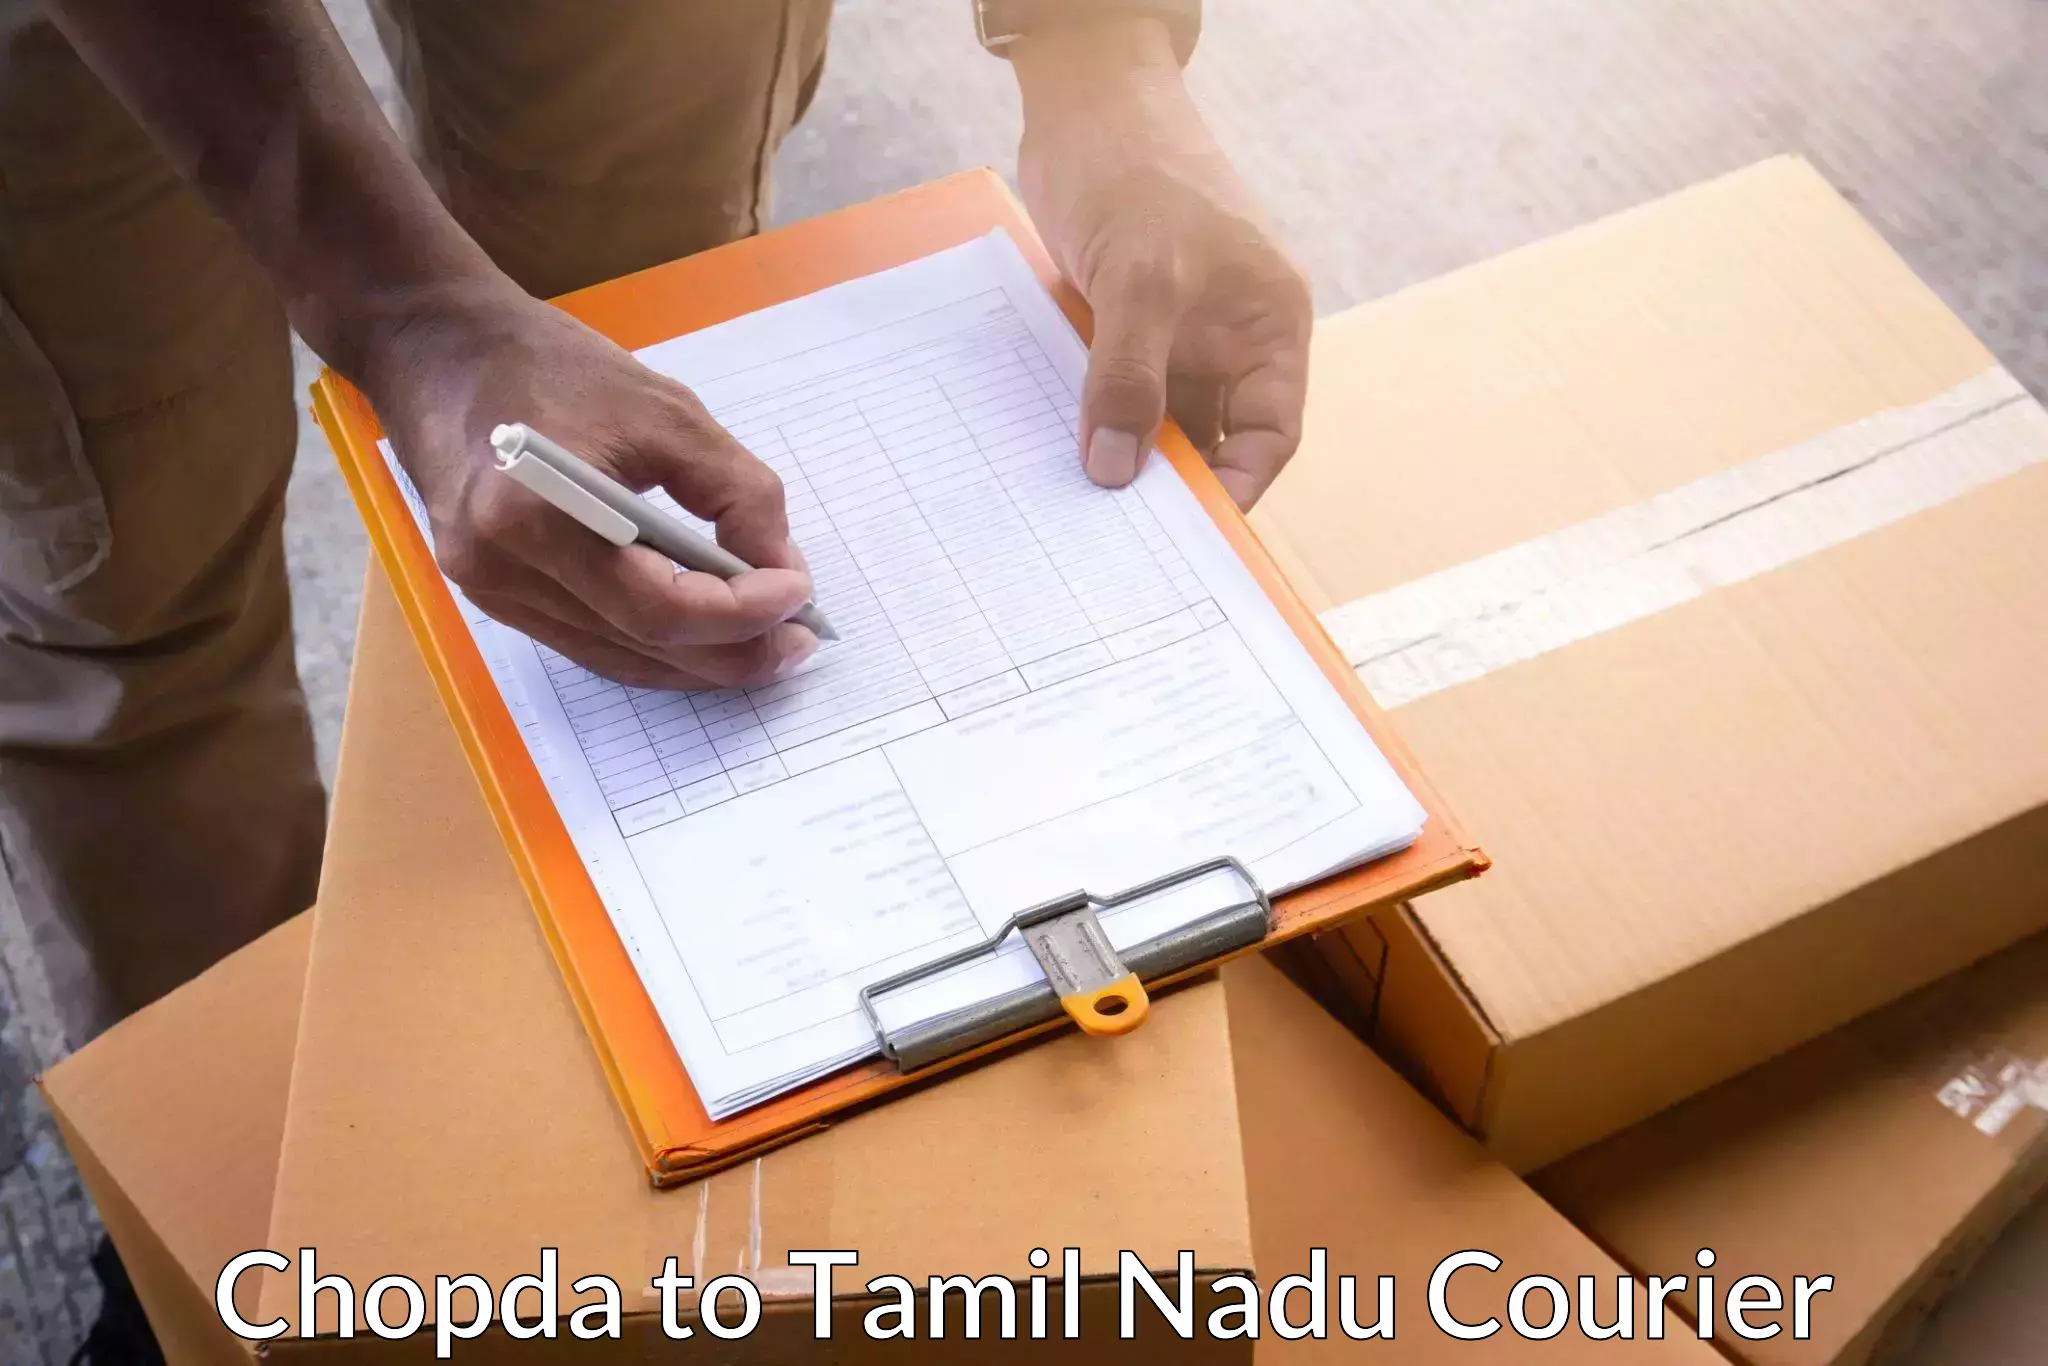 Sustainable courier practices Chopda to Korattur